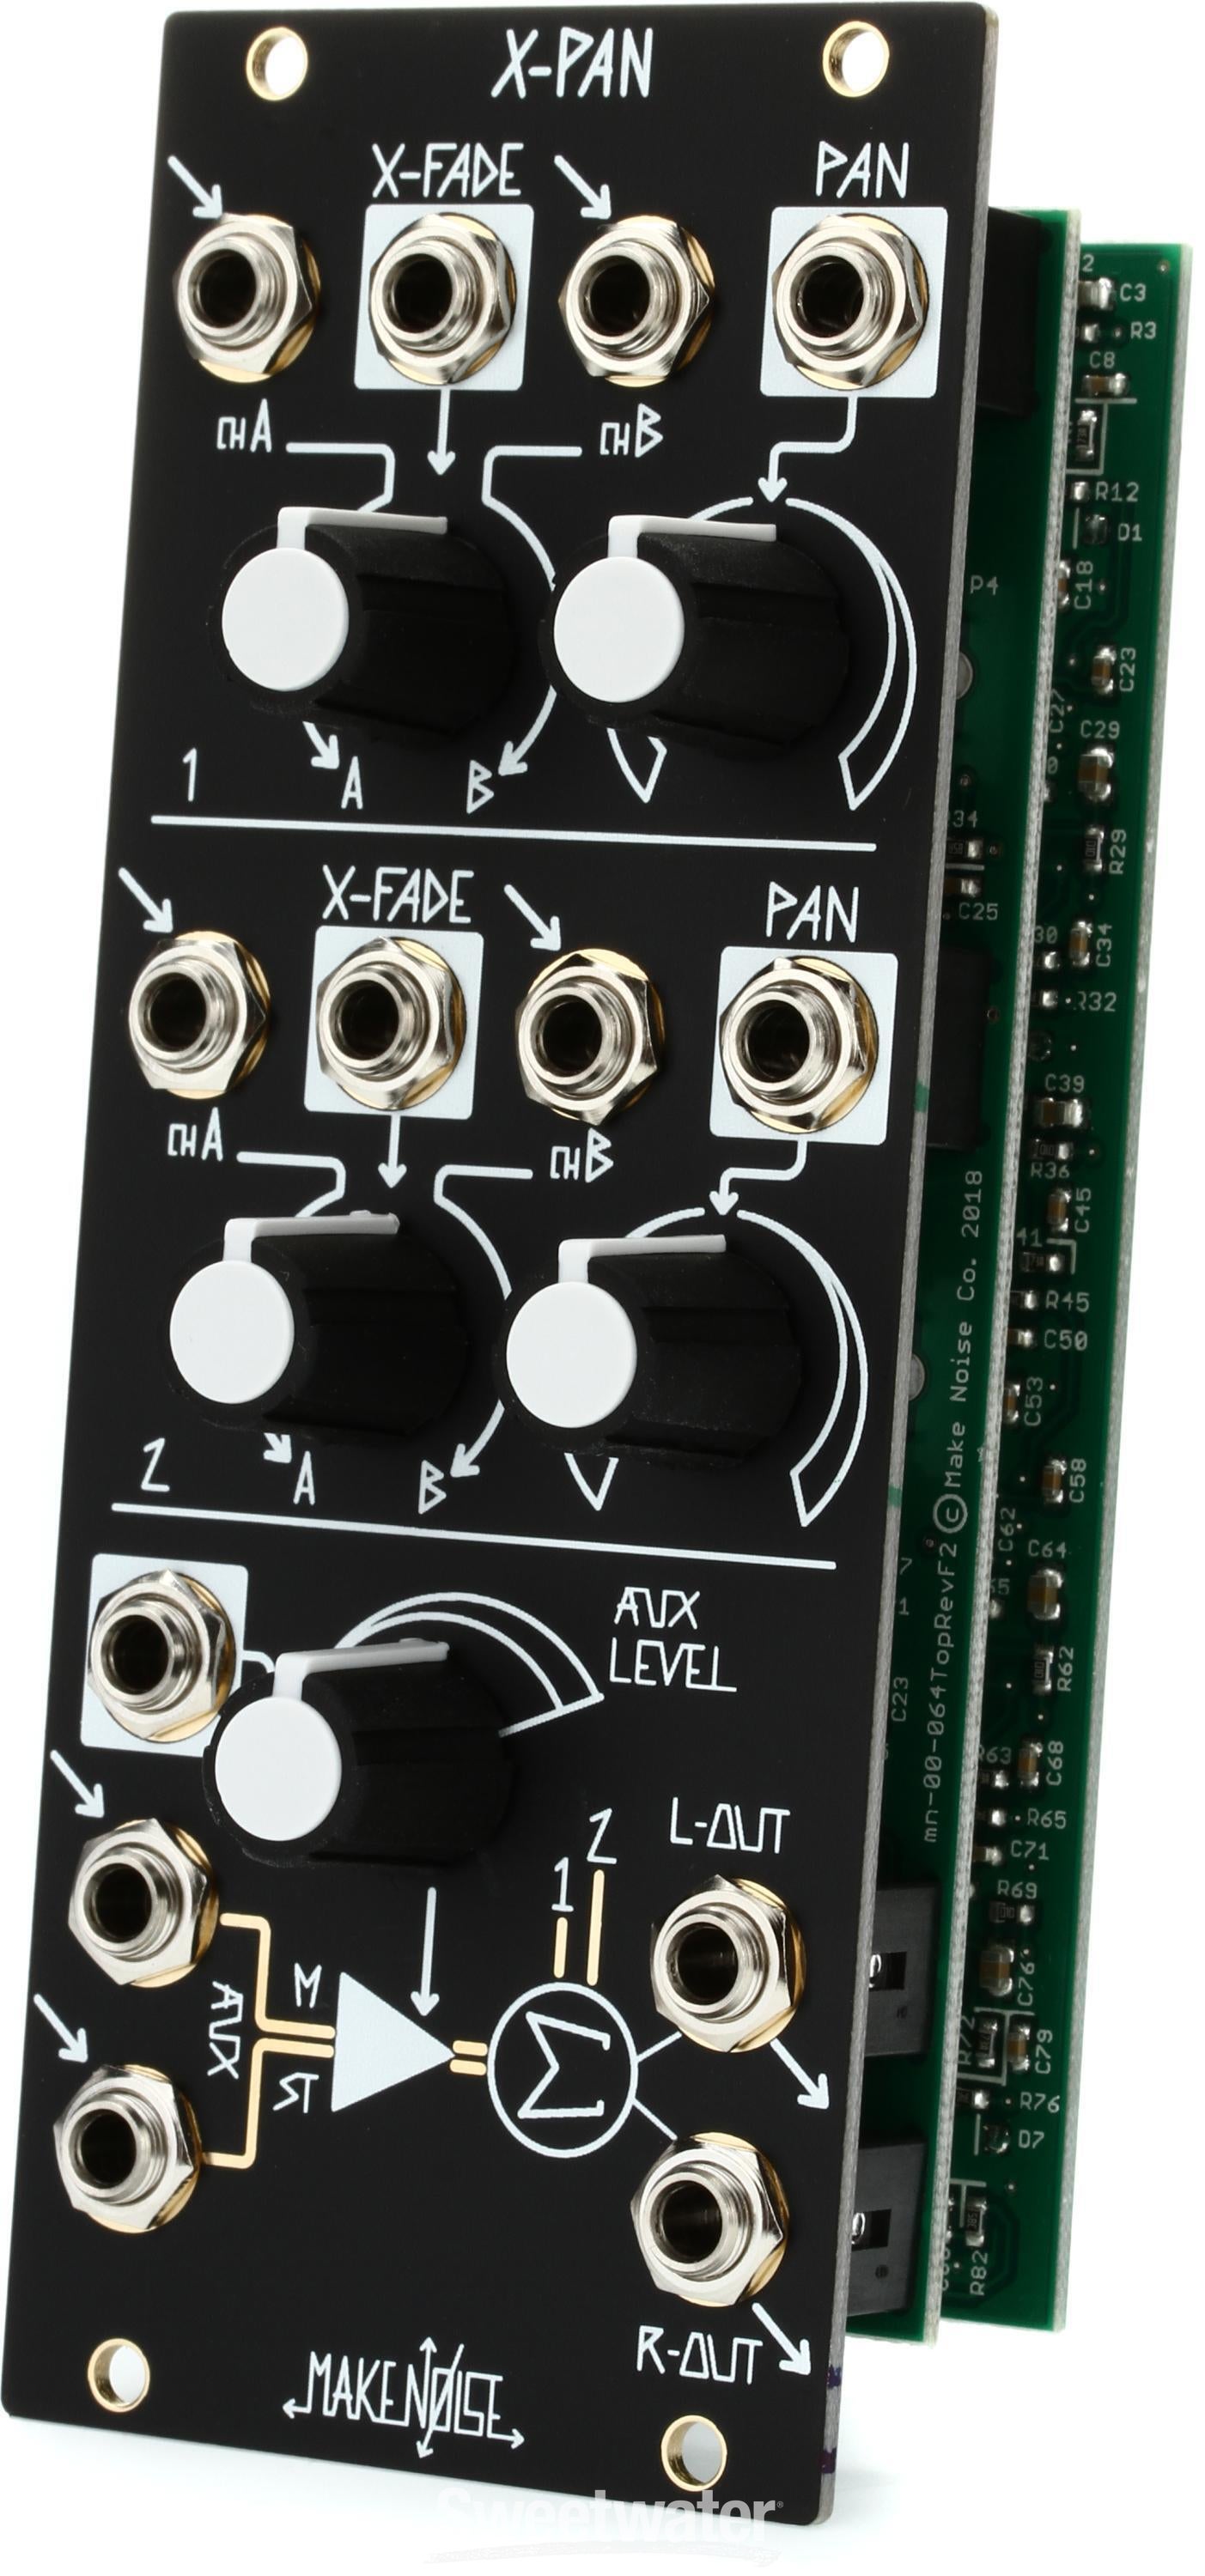 Make Noise X-Pan Five Channel Voltage Controlled Stereo Mixer